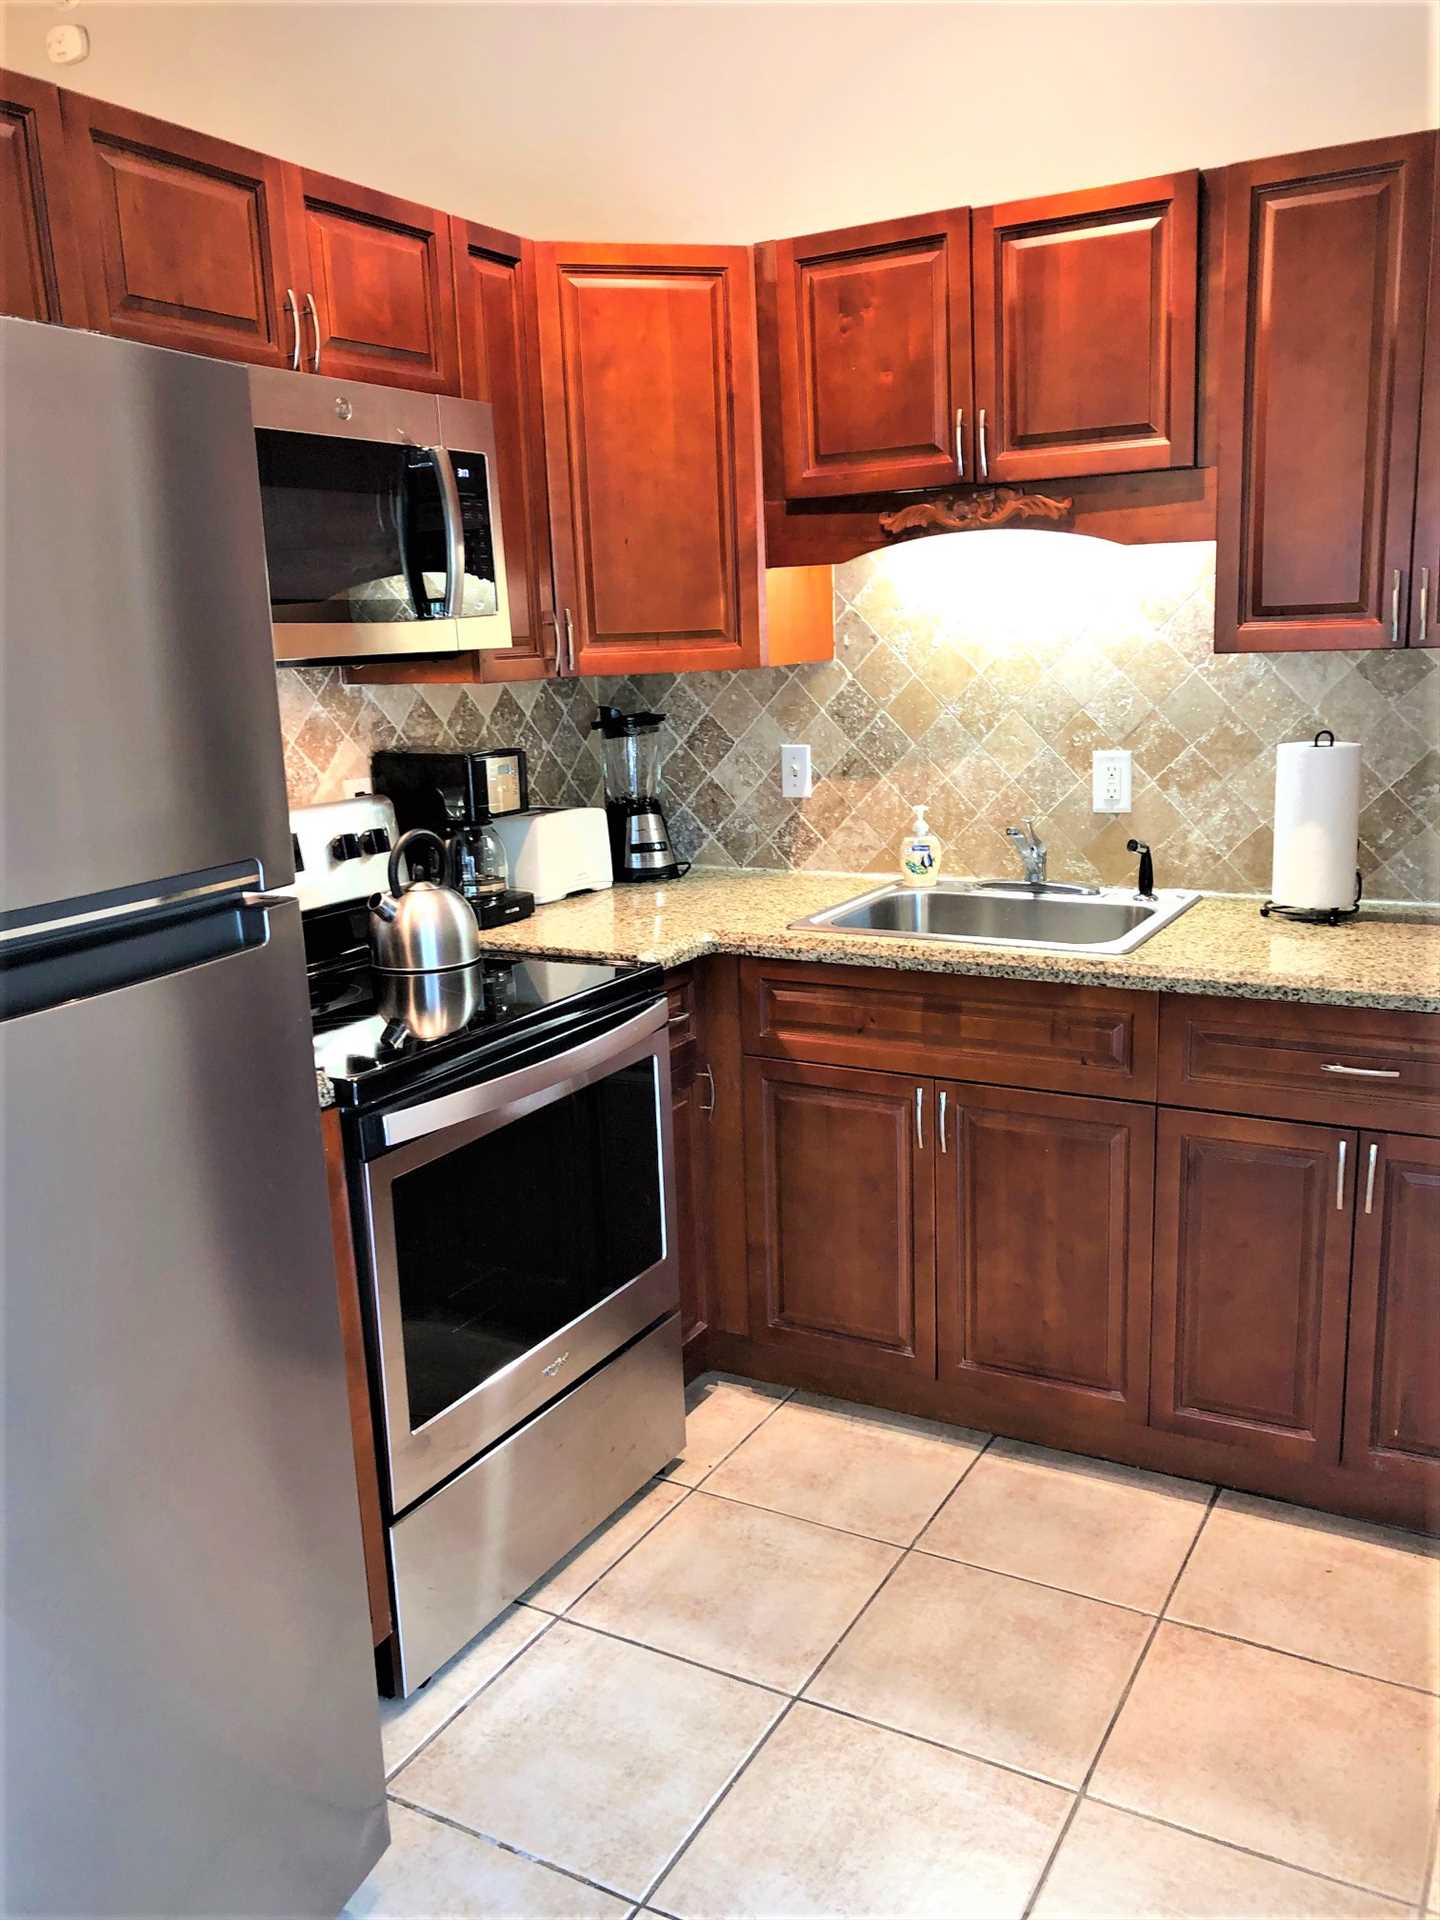 Galley kitchen has all new stainless appliances.